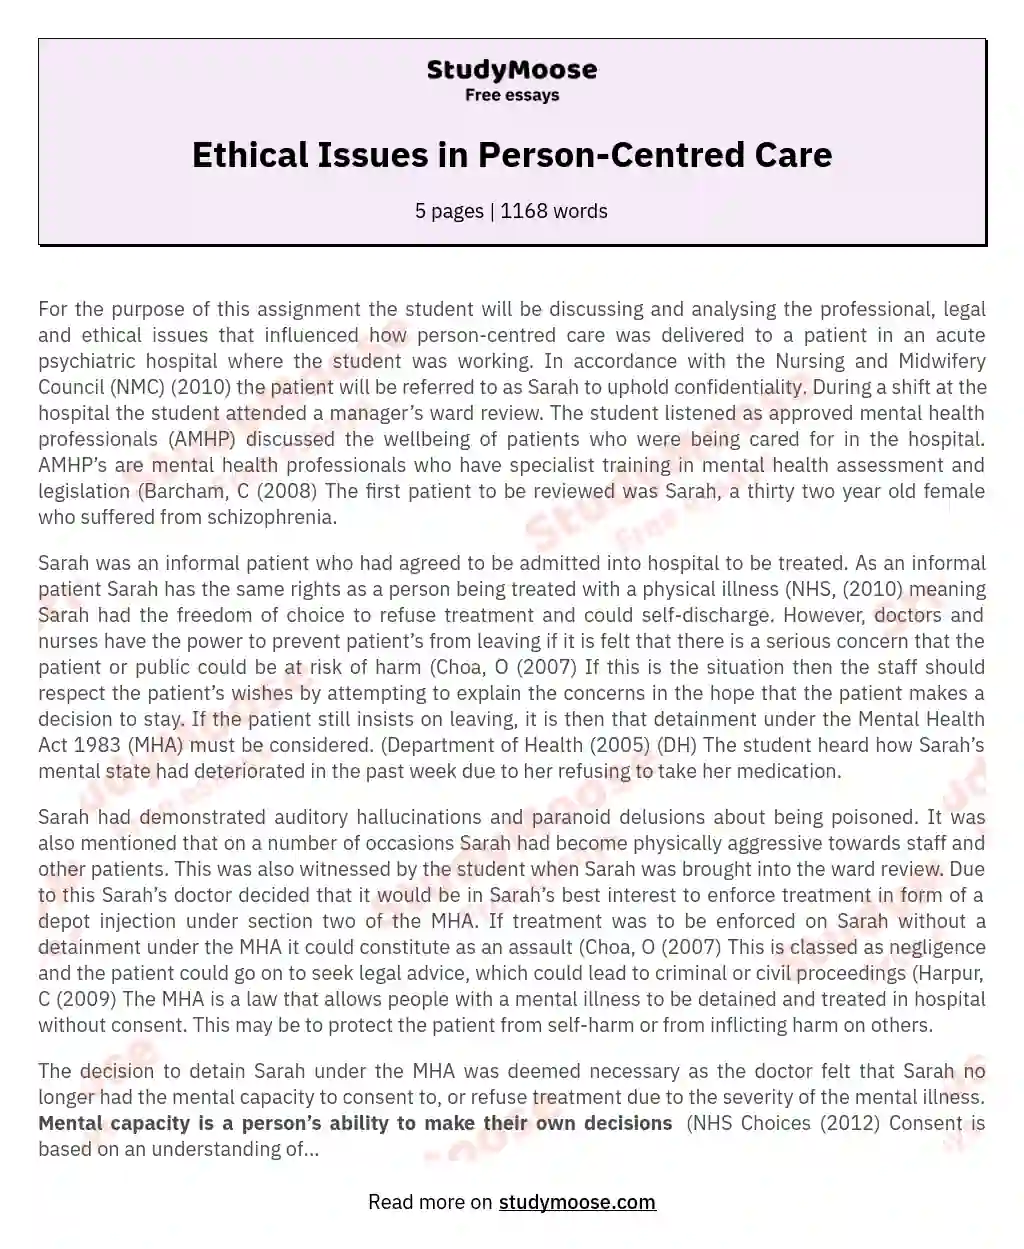 Ethical Issues in Person-Centred Care essay